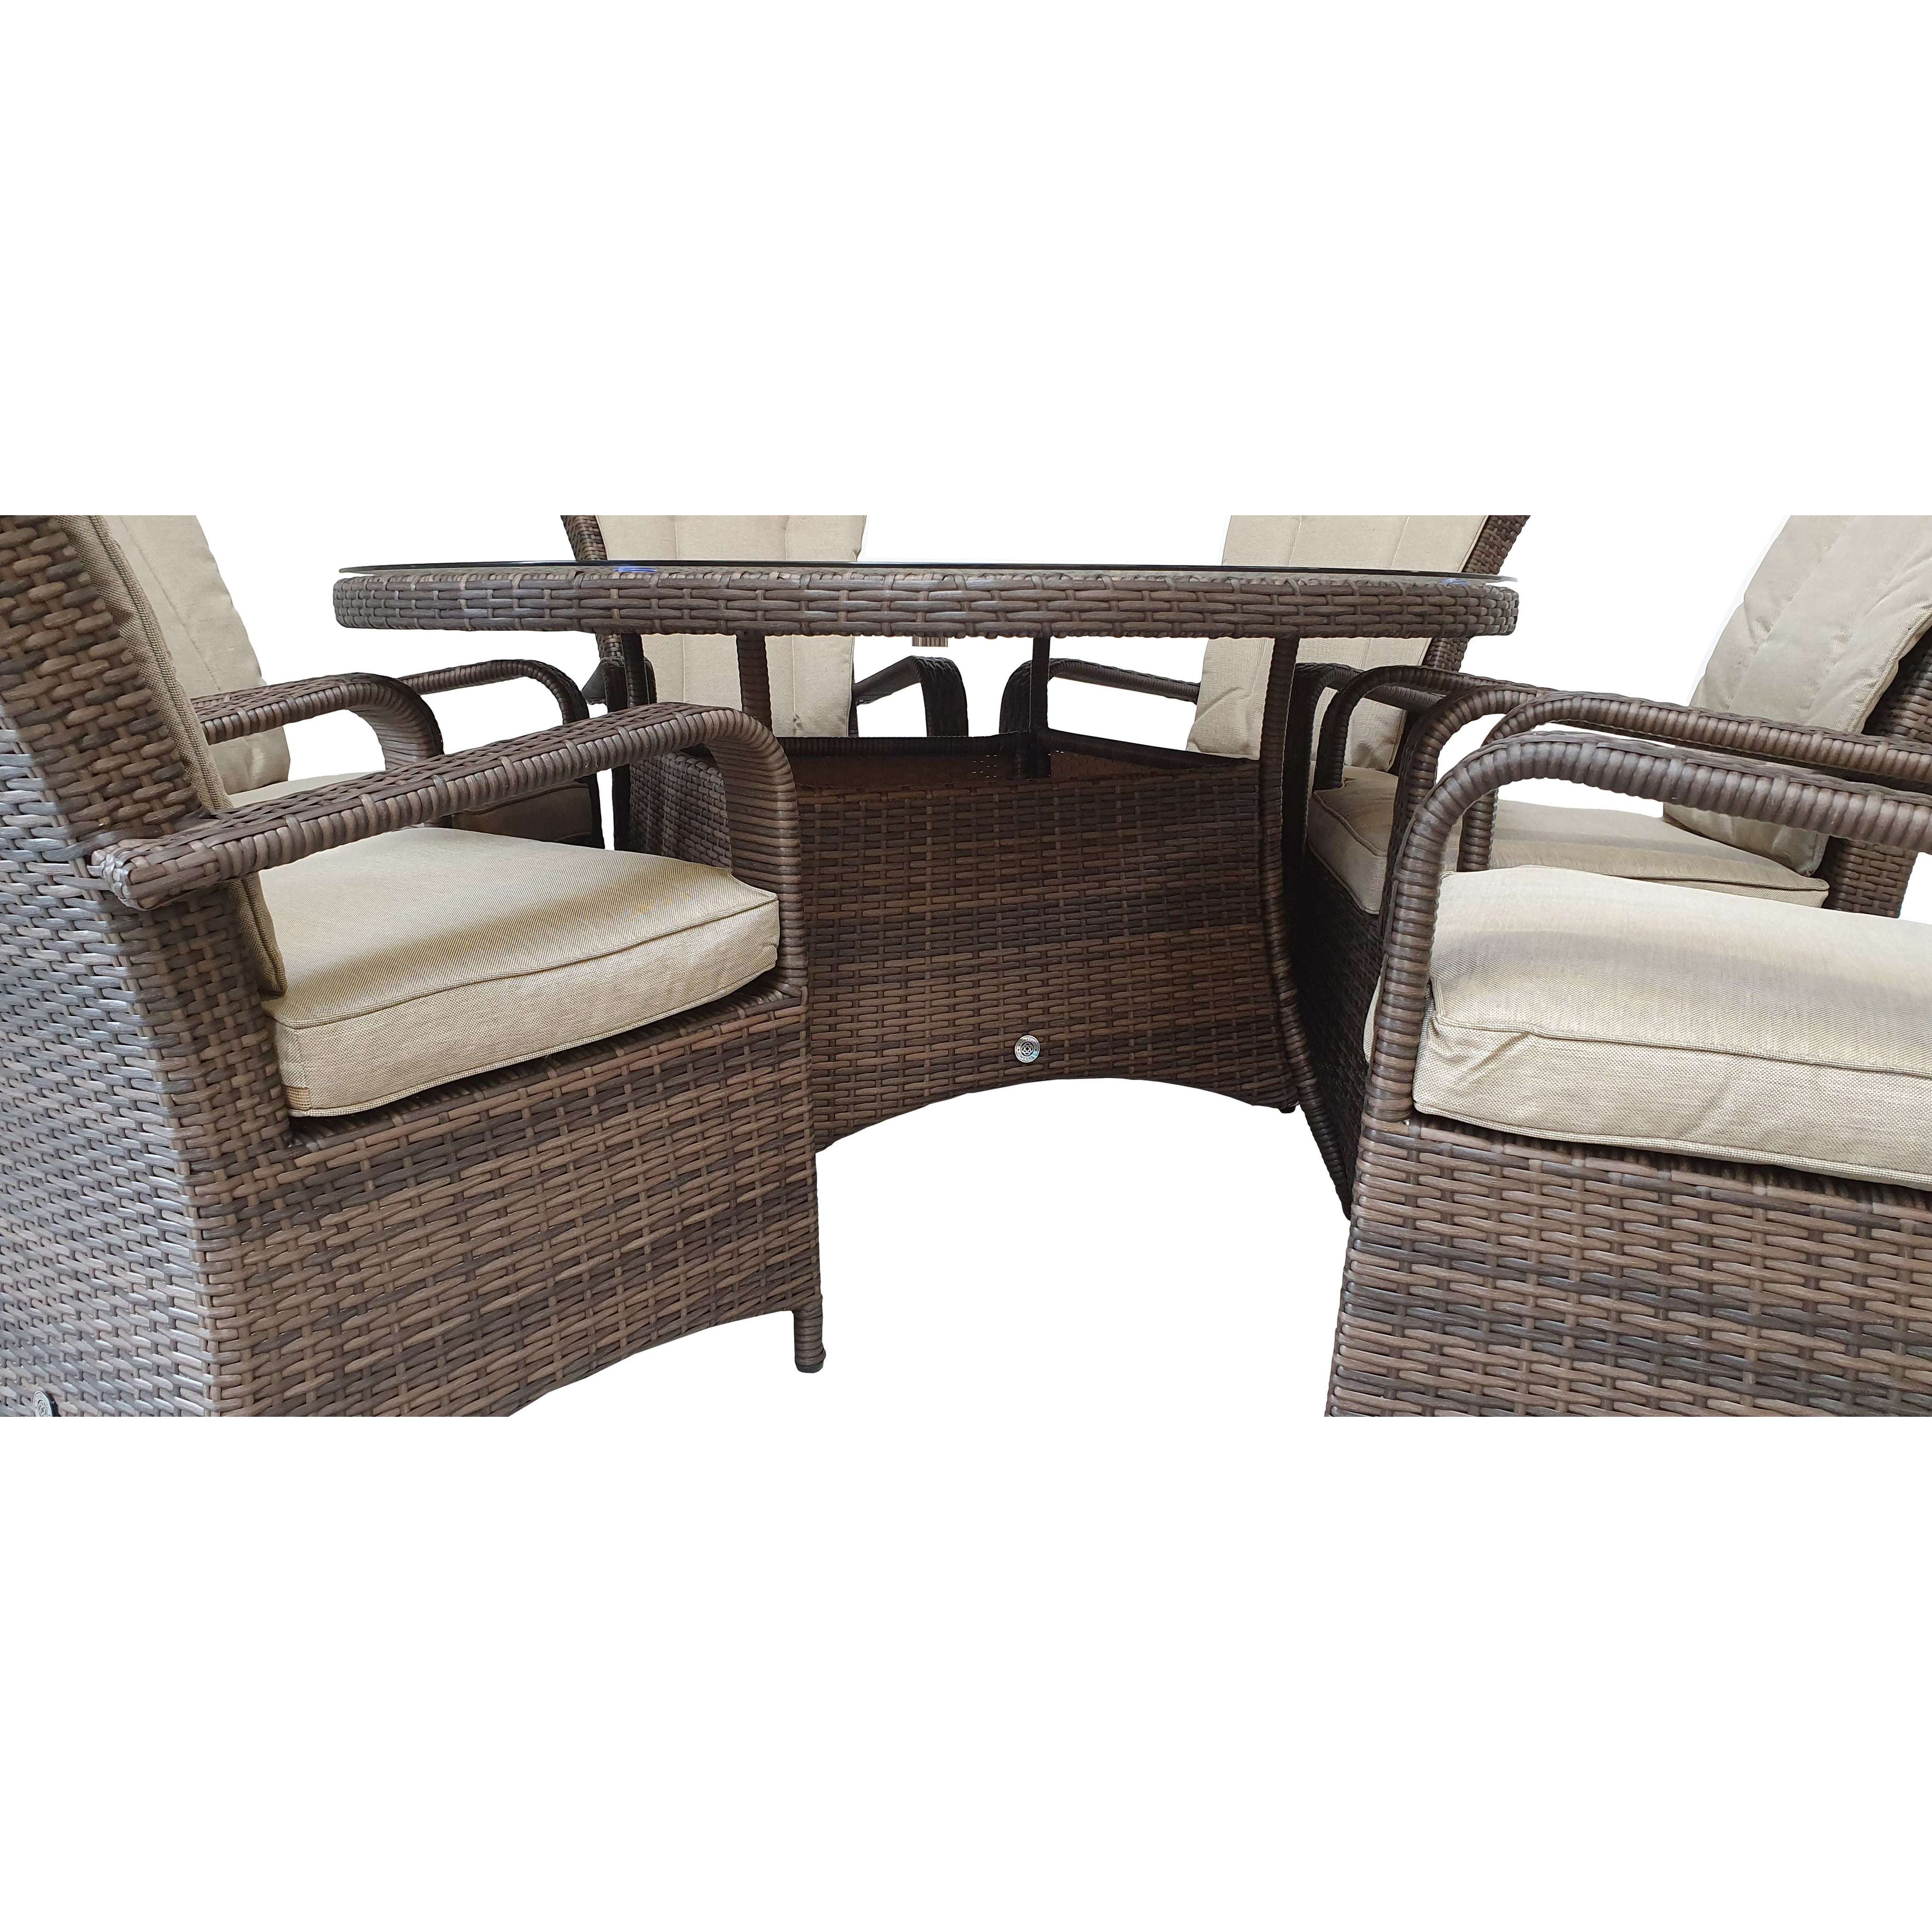 Exceptional Garden:Signature Weave Florence 6-Seater Round Dining Set